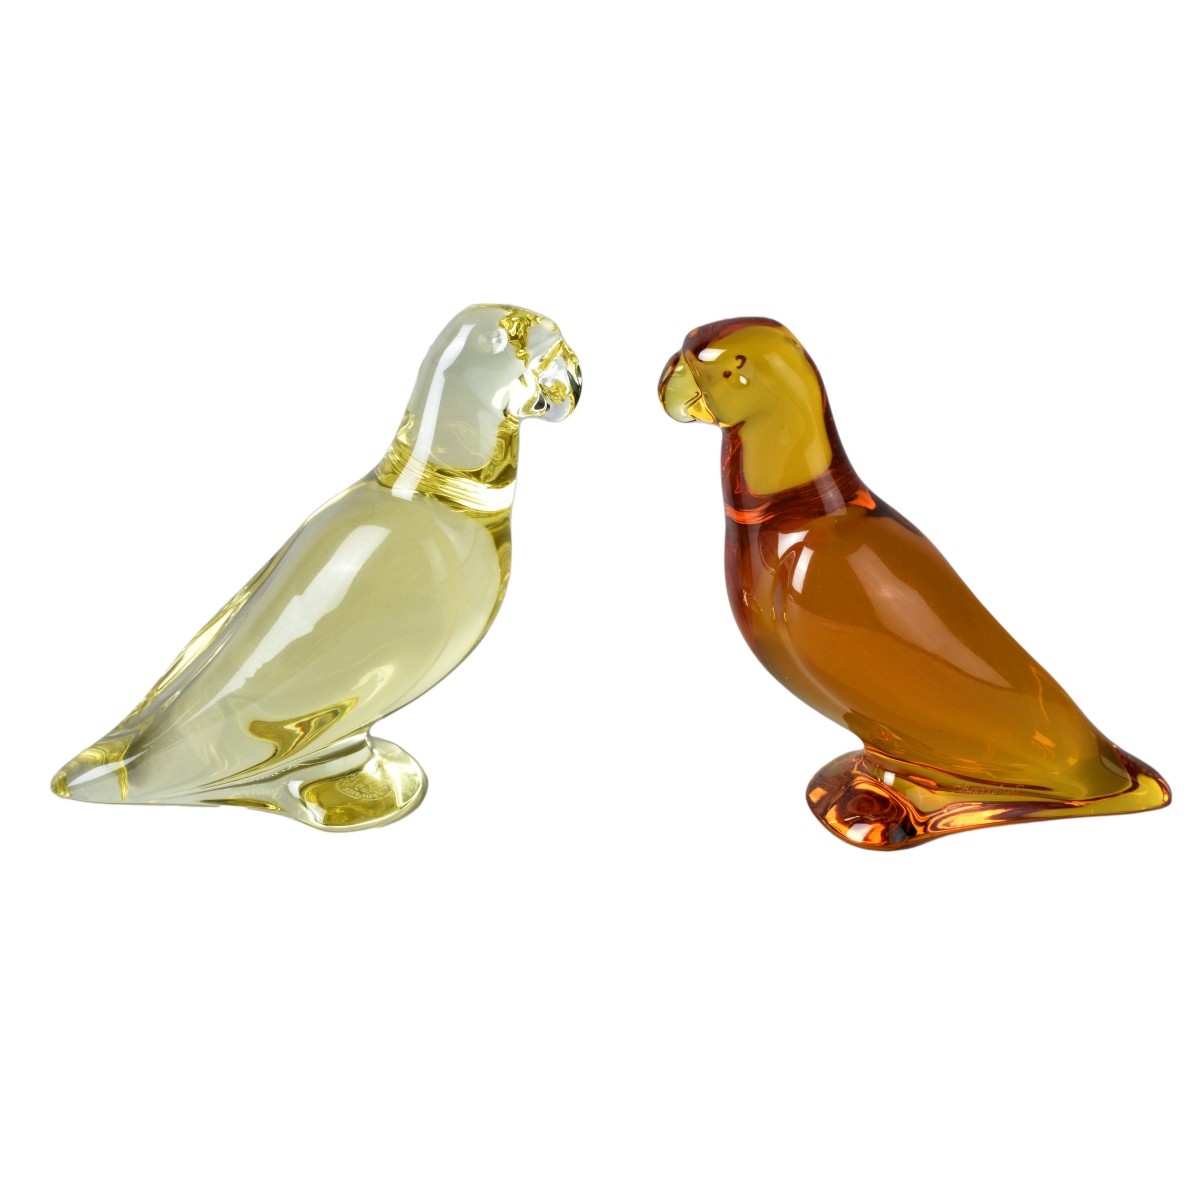 Two Baccarat Crystal Figurines